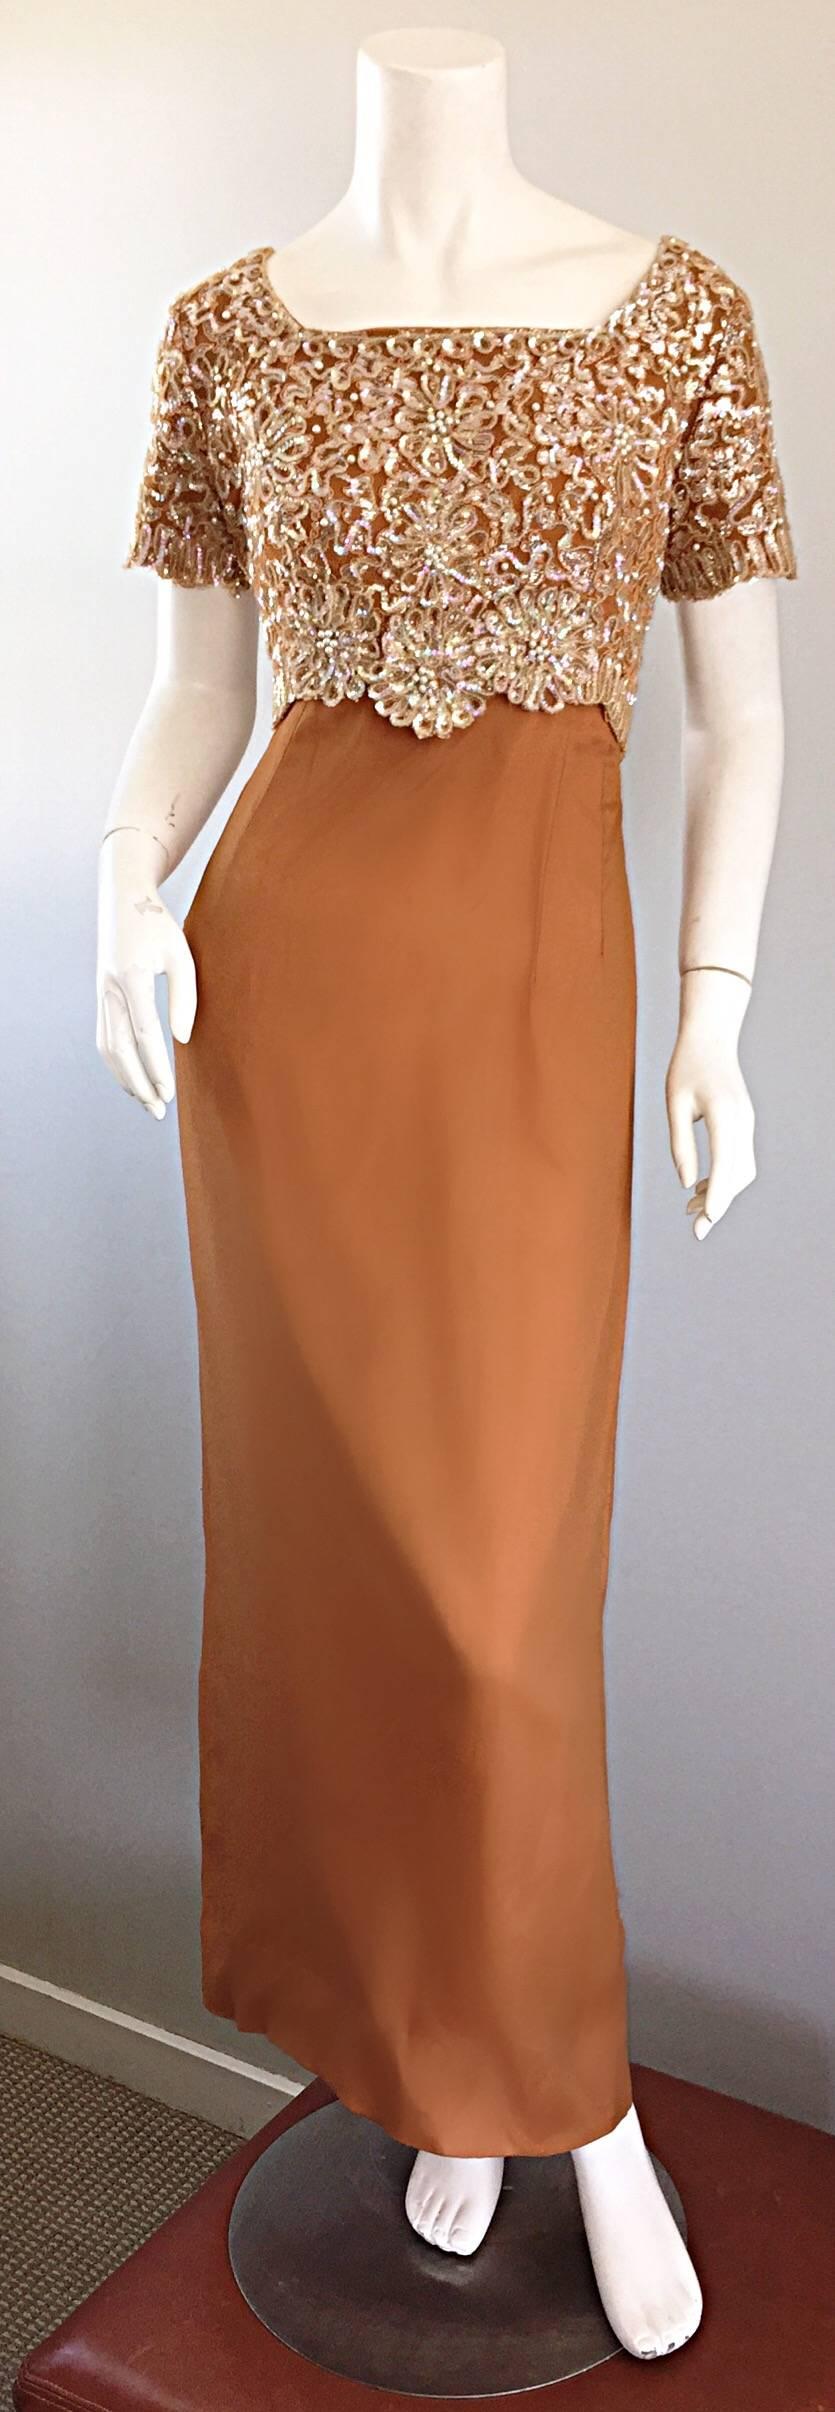 Beautiful 1960s EMMA DOMB terra cotta / light brown silk chiffon full length short sleeve evening dress! Features hand-sewn iridescent sequins, raffia, beads, and pearls throughout the entire front and back of the fitted bodice. Multiple layers of